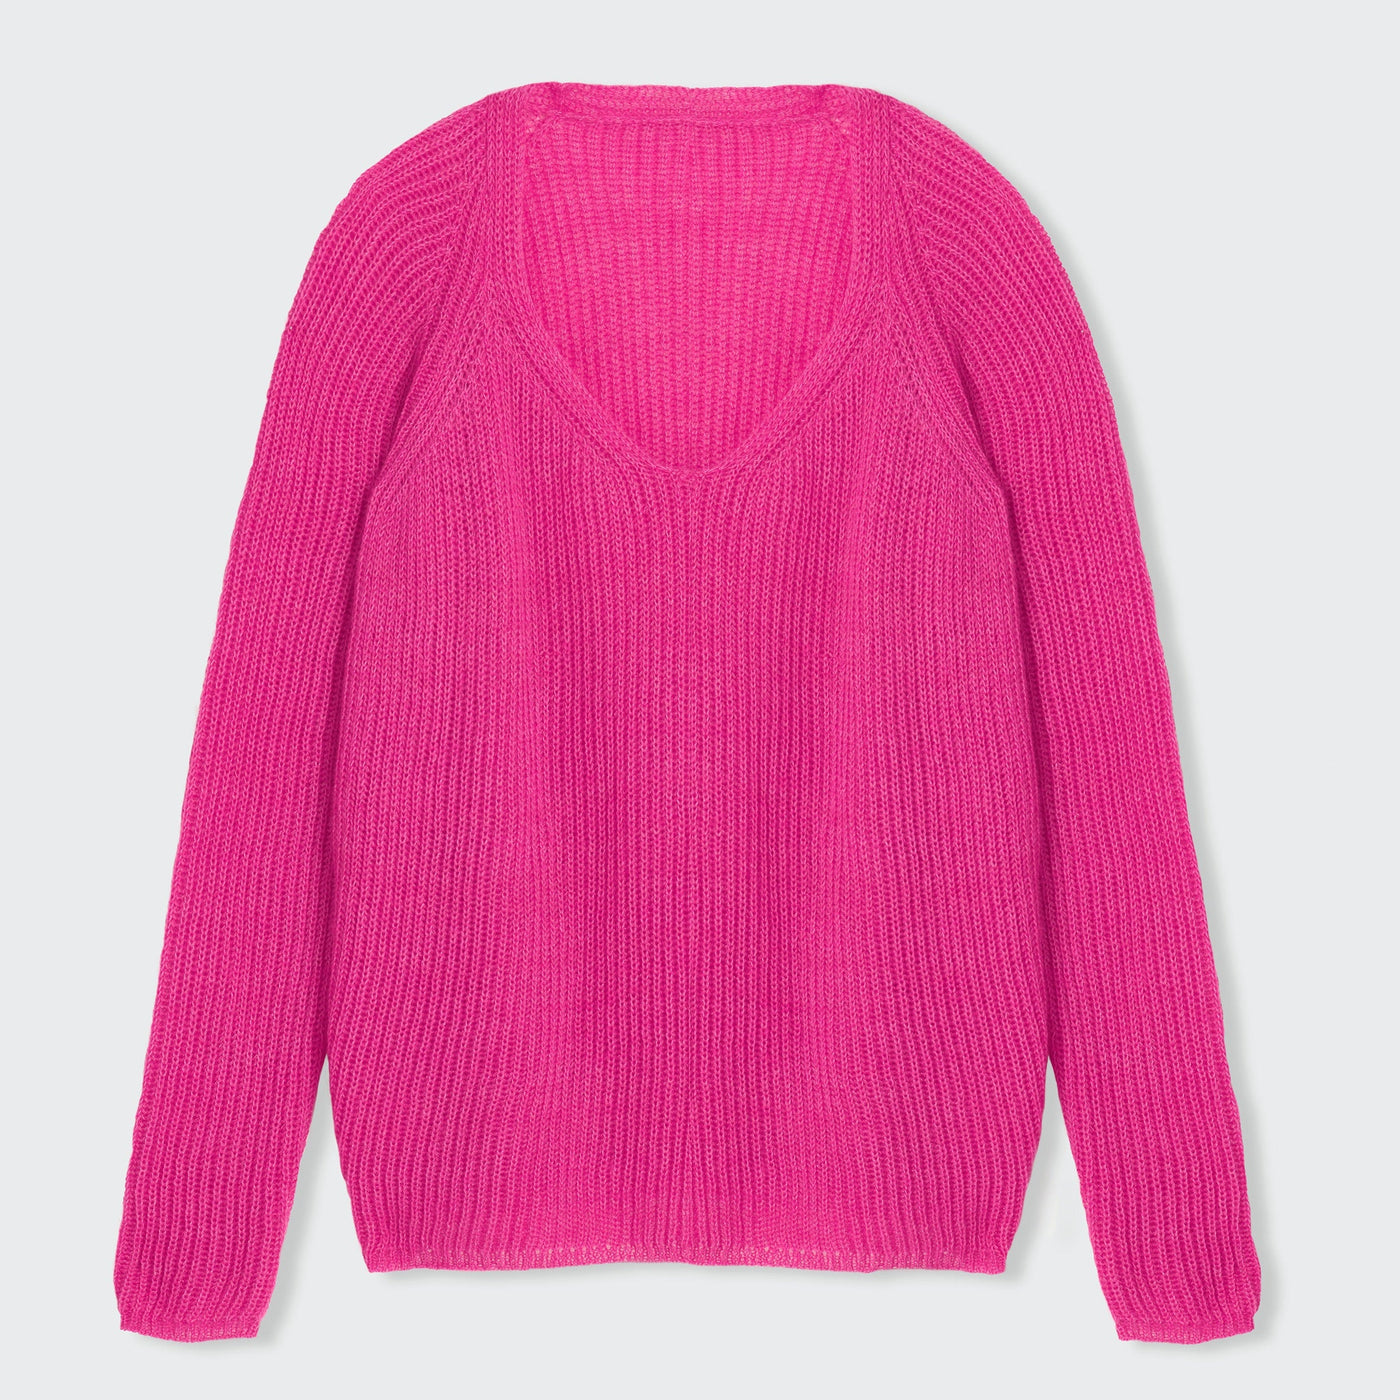 Liapure Atelier - Pink Mohair Knit limited edit